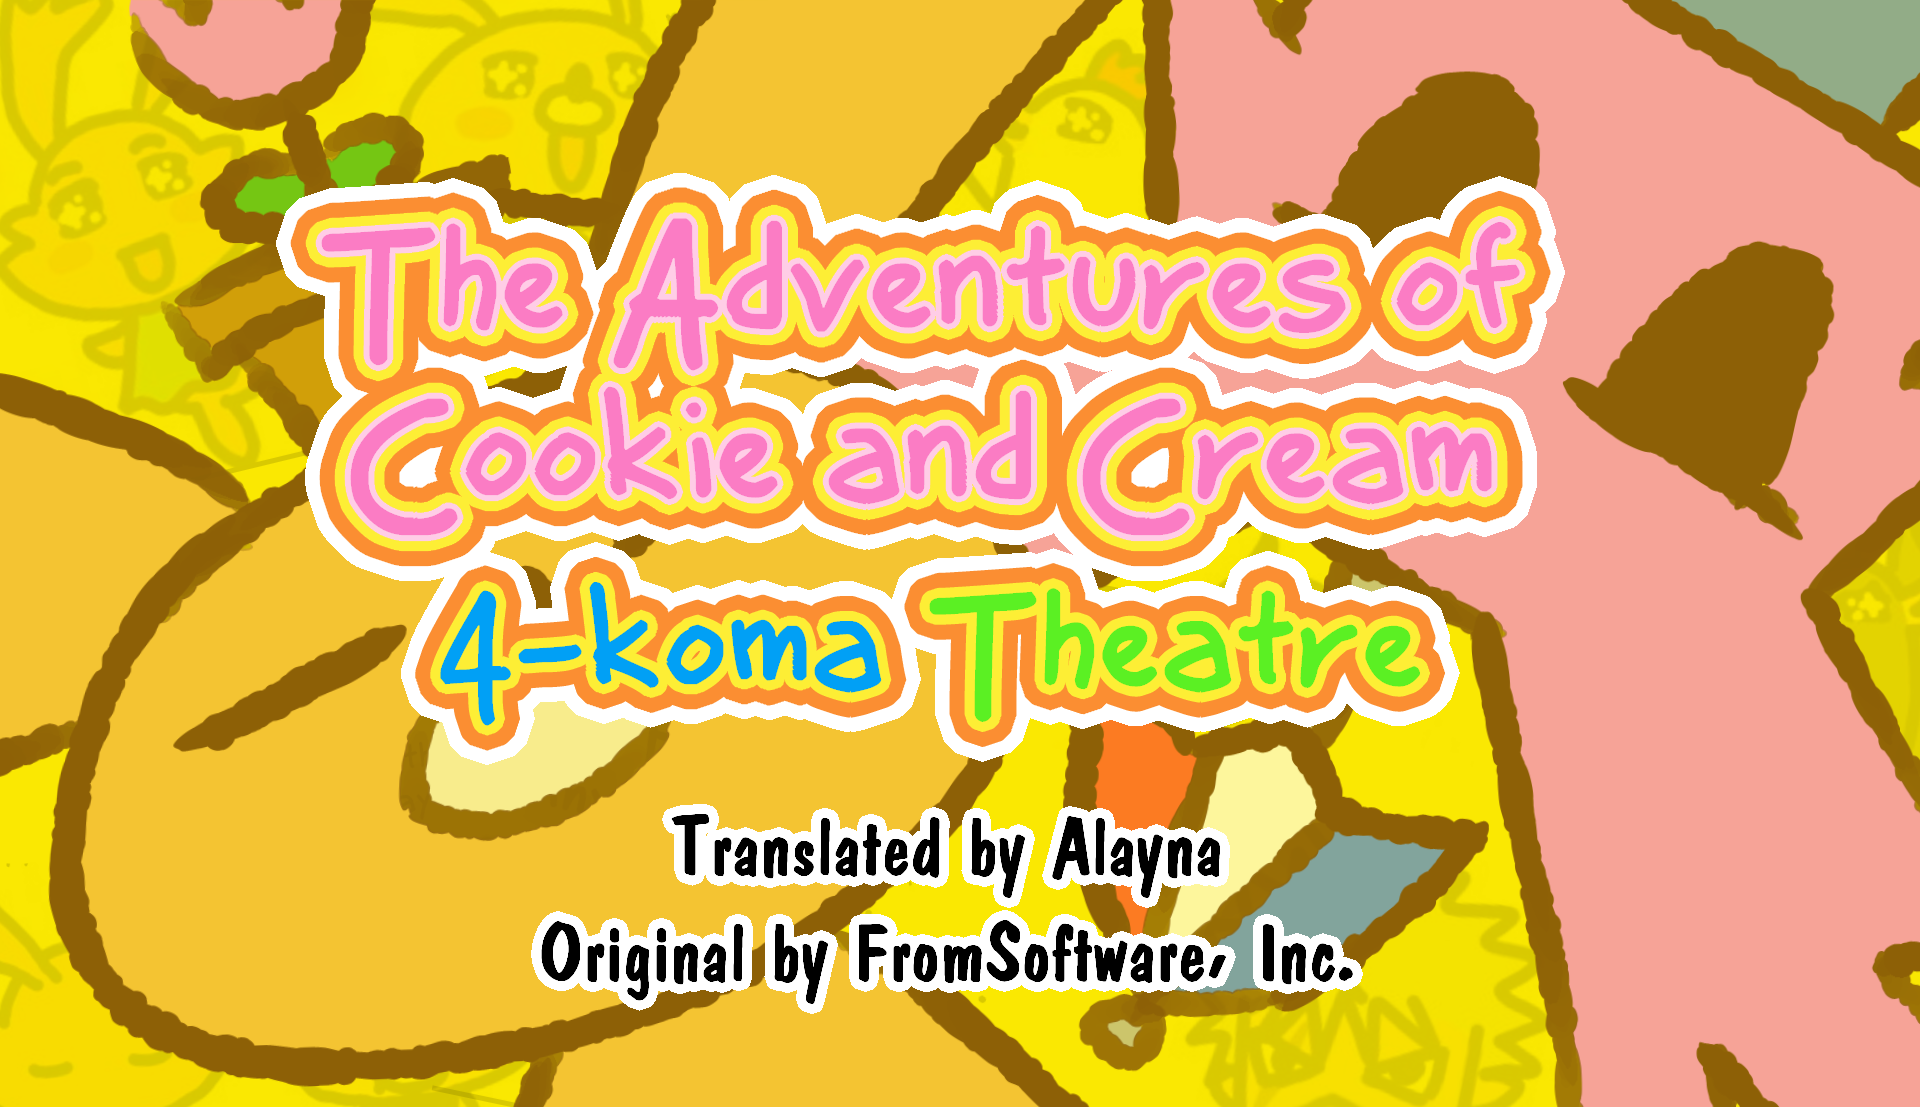 drawing of cookie (yellow rabbit, closed eyes, tulip on head) and cream (pink rabbit, blue dress, beach umbrella on head, neutral eyes with lowered eyebrows) with bits of 4-koma drawings behind them. in the foreground is a colourful title called 'The Adventures of Cookie and Cream 4-koma Theatre'. below this is the line 'Translated by alayna, original by Fromsoftware, inc'